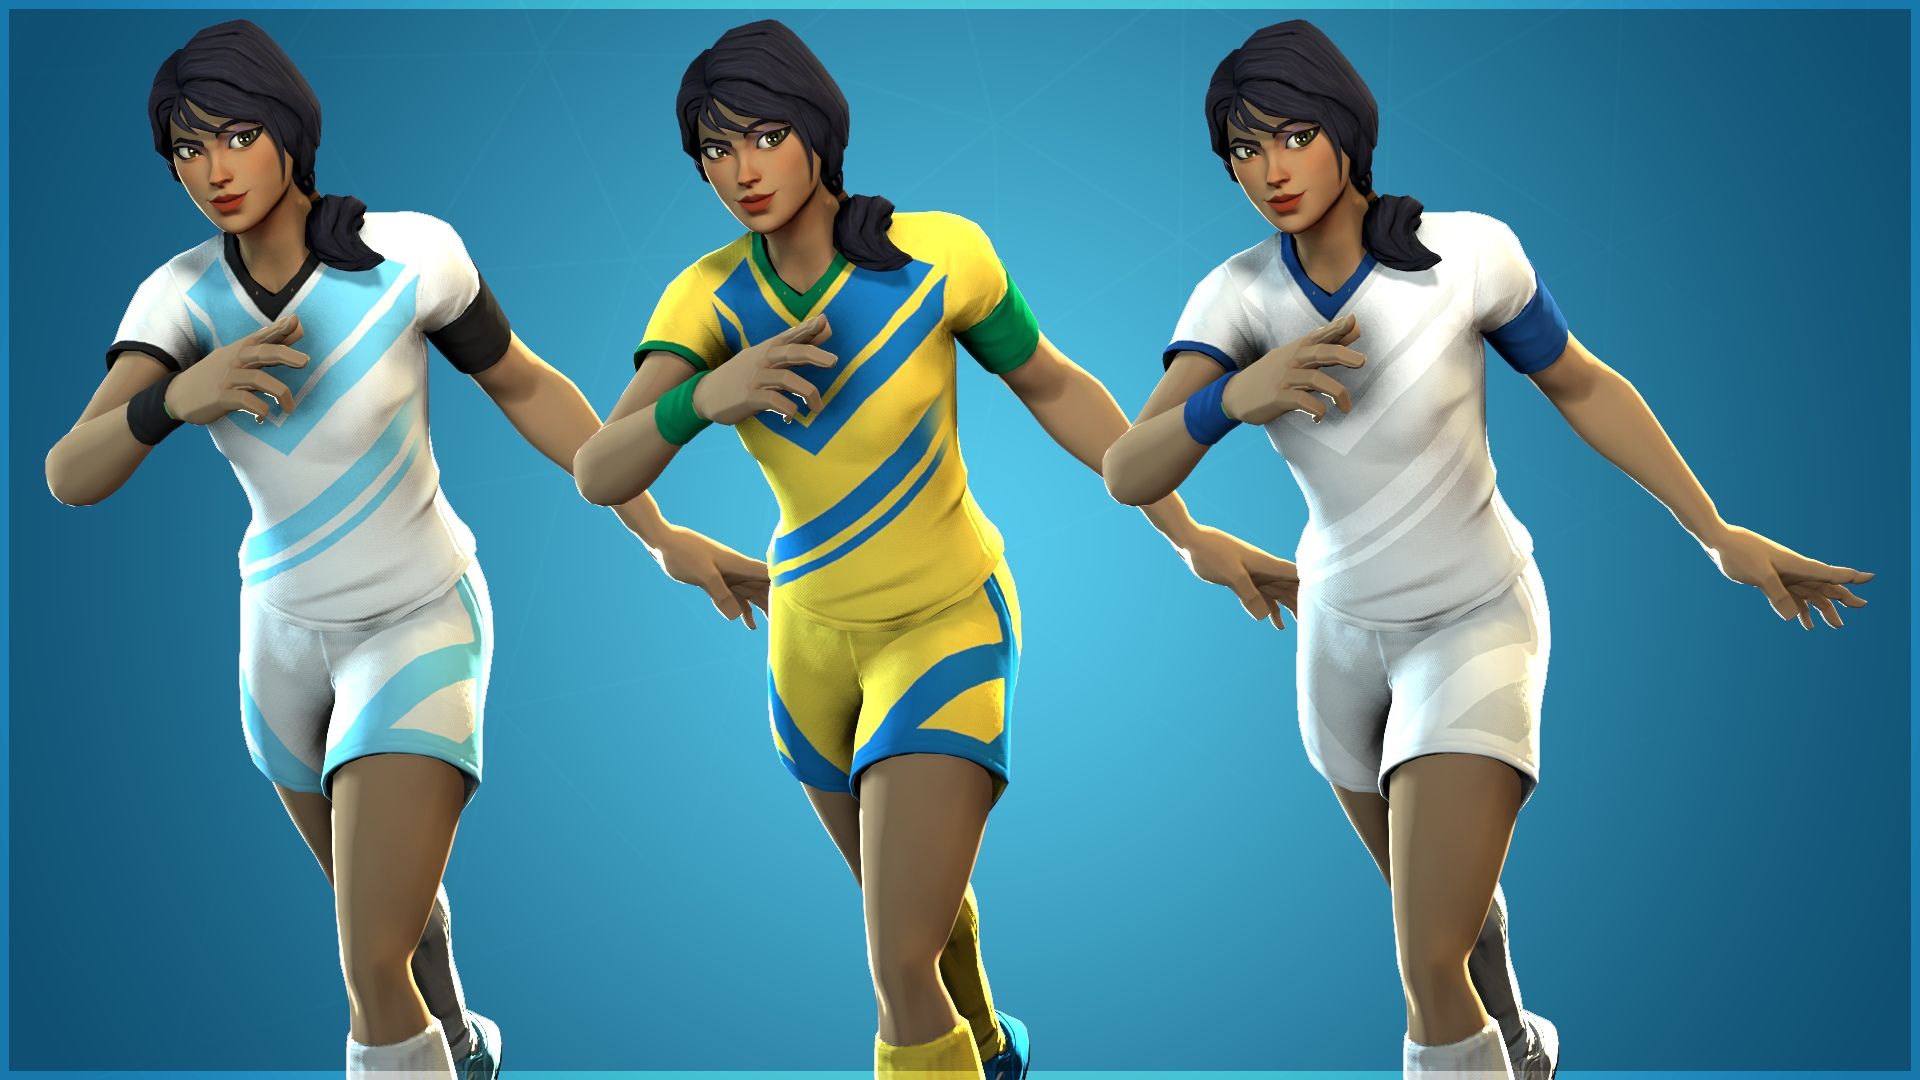 Clinical Crosser Fortnite Wallpapers posted by Ryan Cunningham.